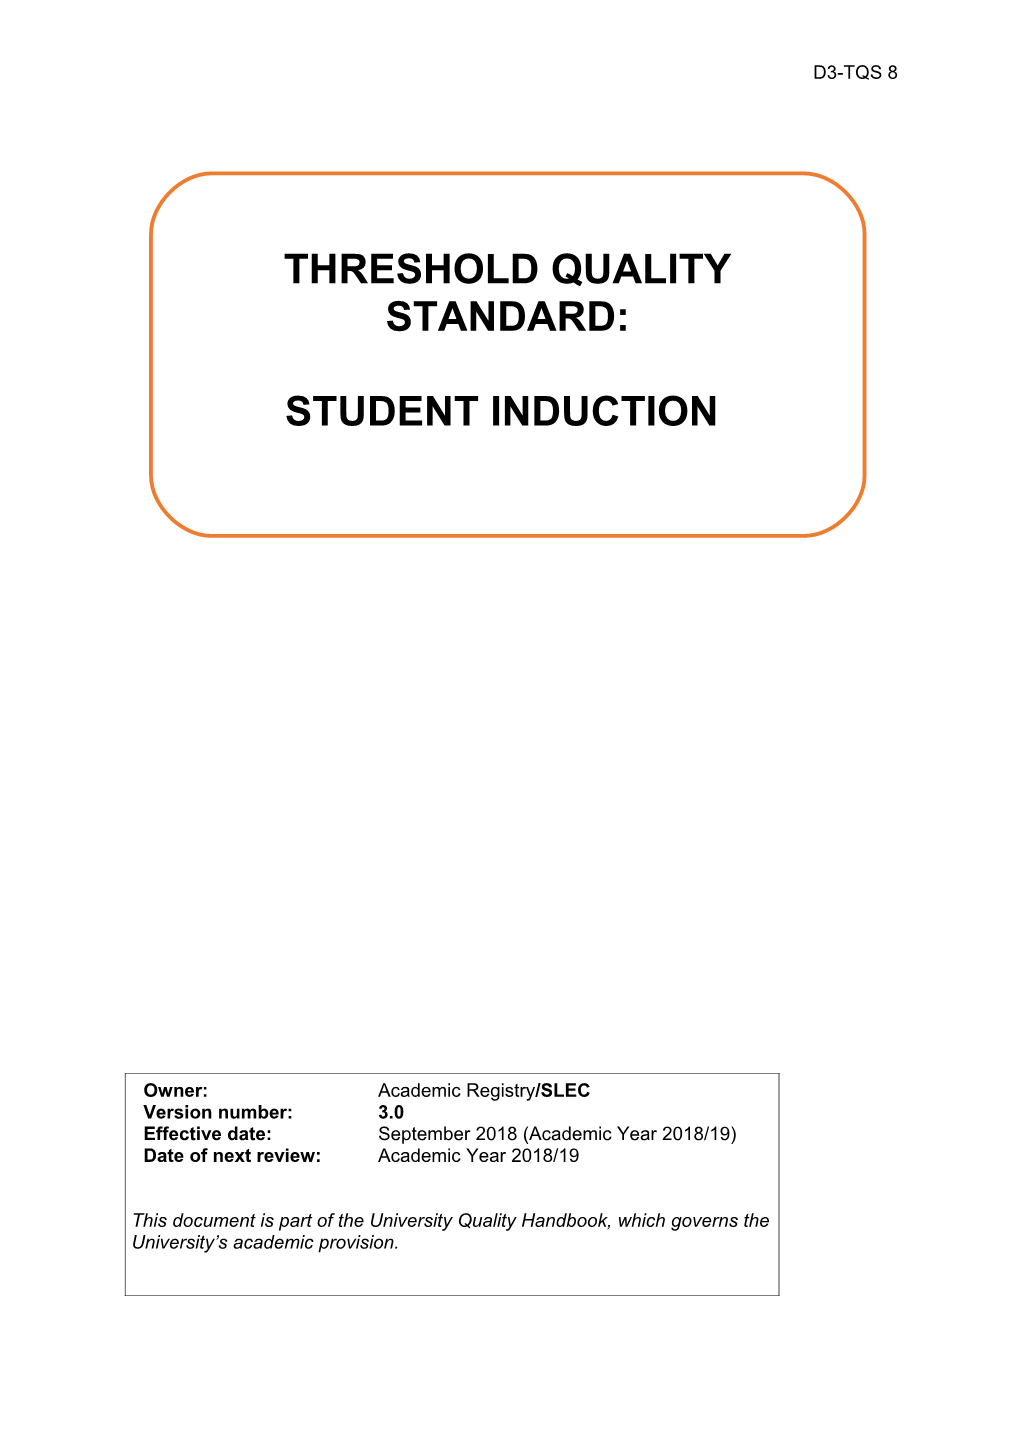 1.1Application of Threshold Quality Standards